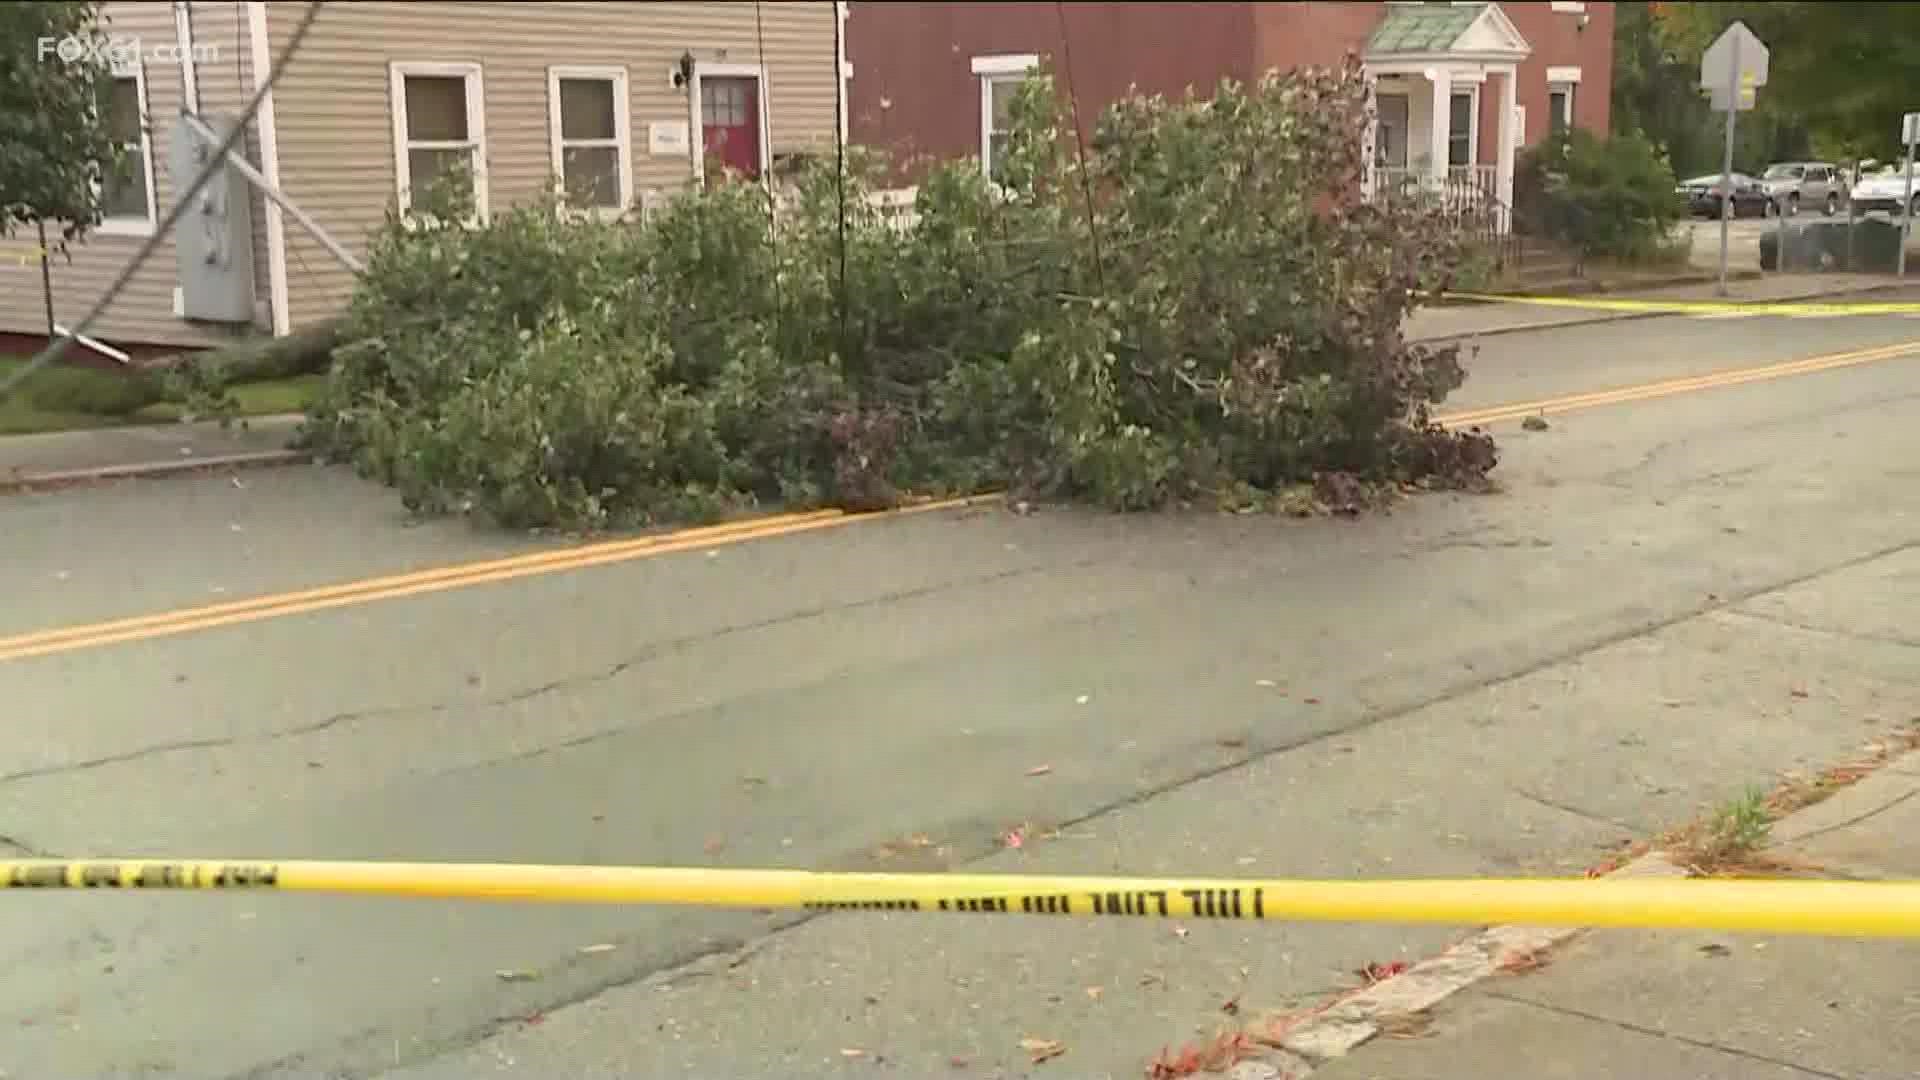 The storm is heading out Wednesday morning but it's leaving behind some damage in Connecticut.